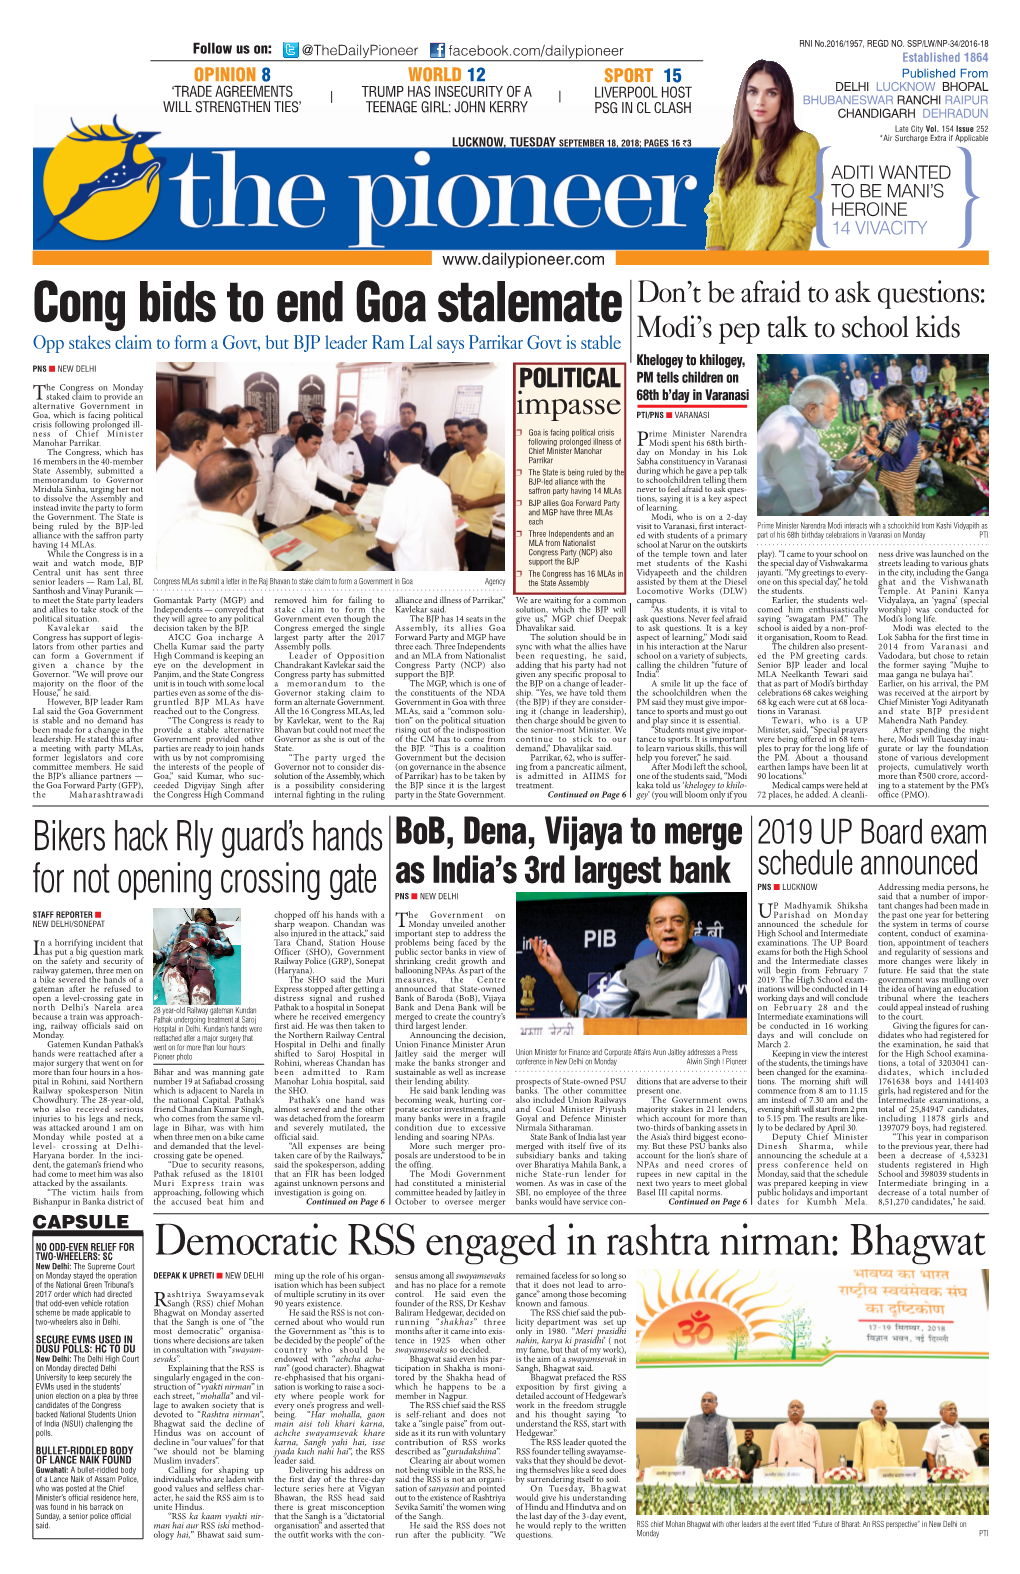 Cong Bids to End Goa Stalemate